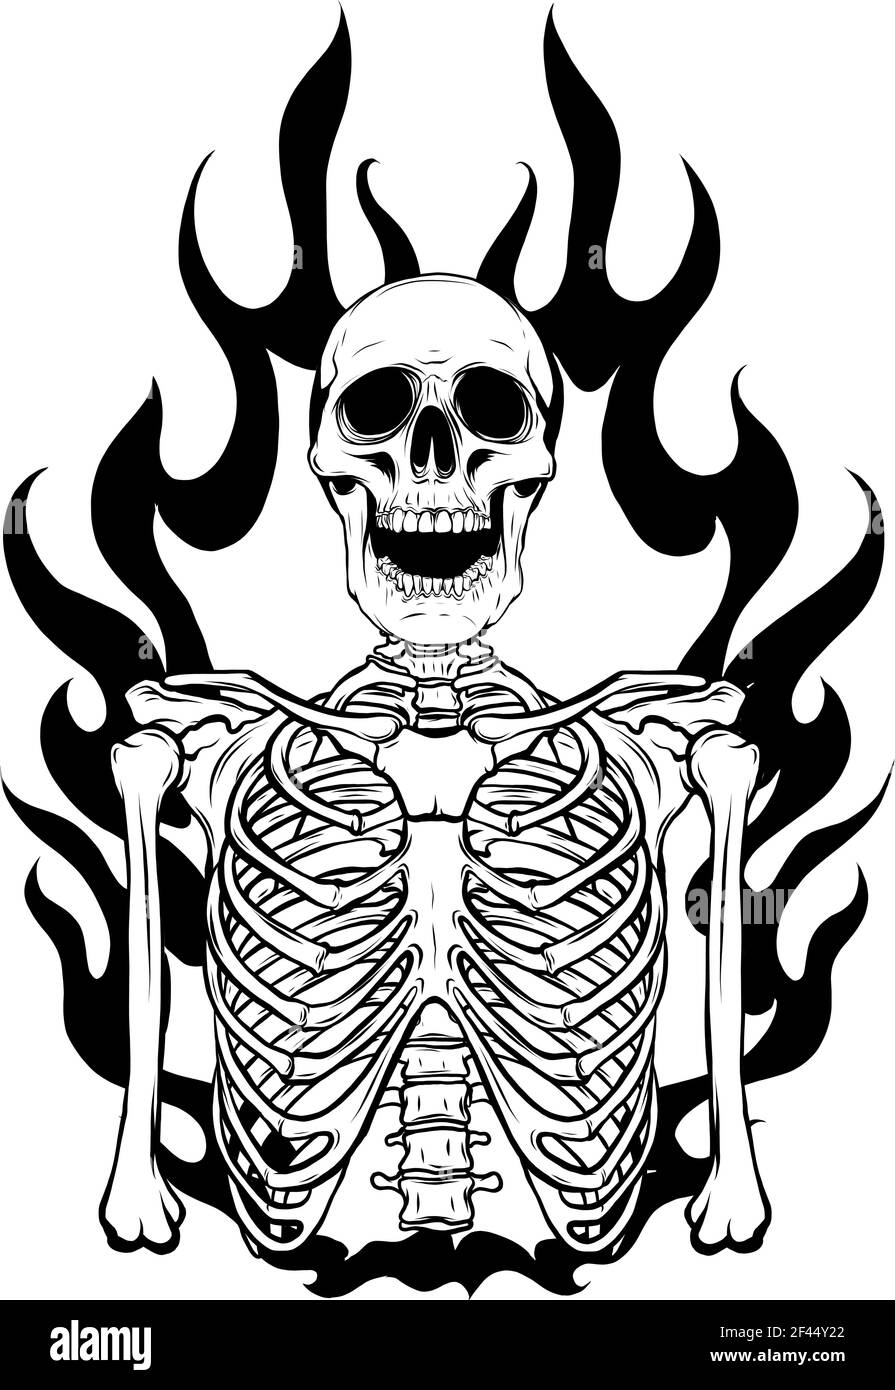 draw in black and white of vector illustration of skeleton in flame design Stock Vector